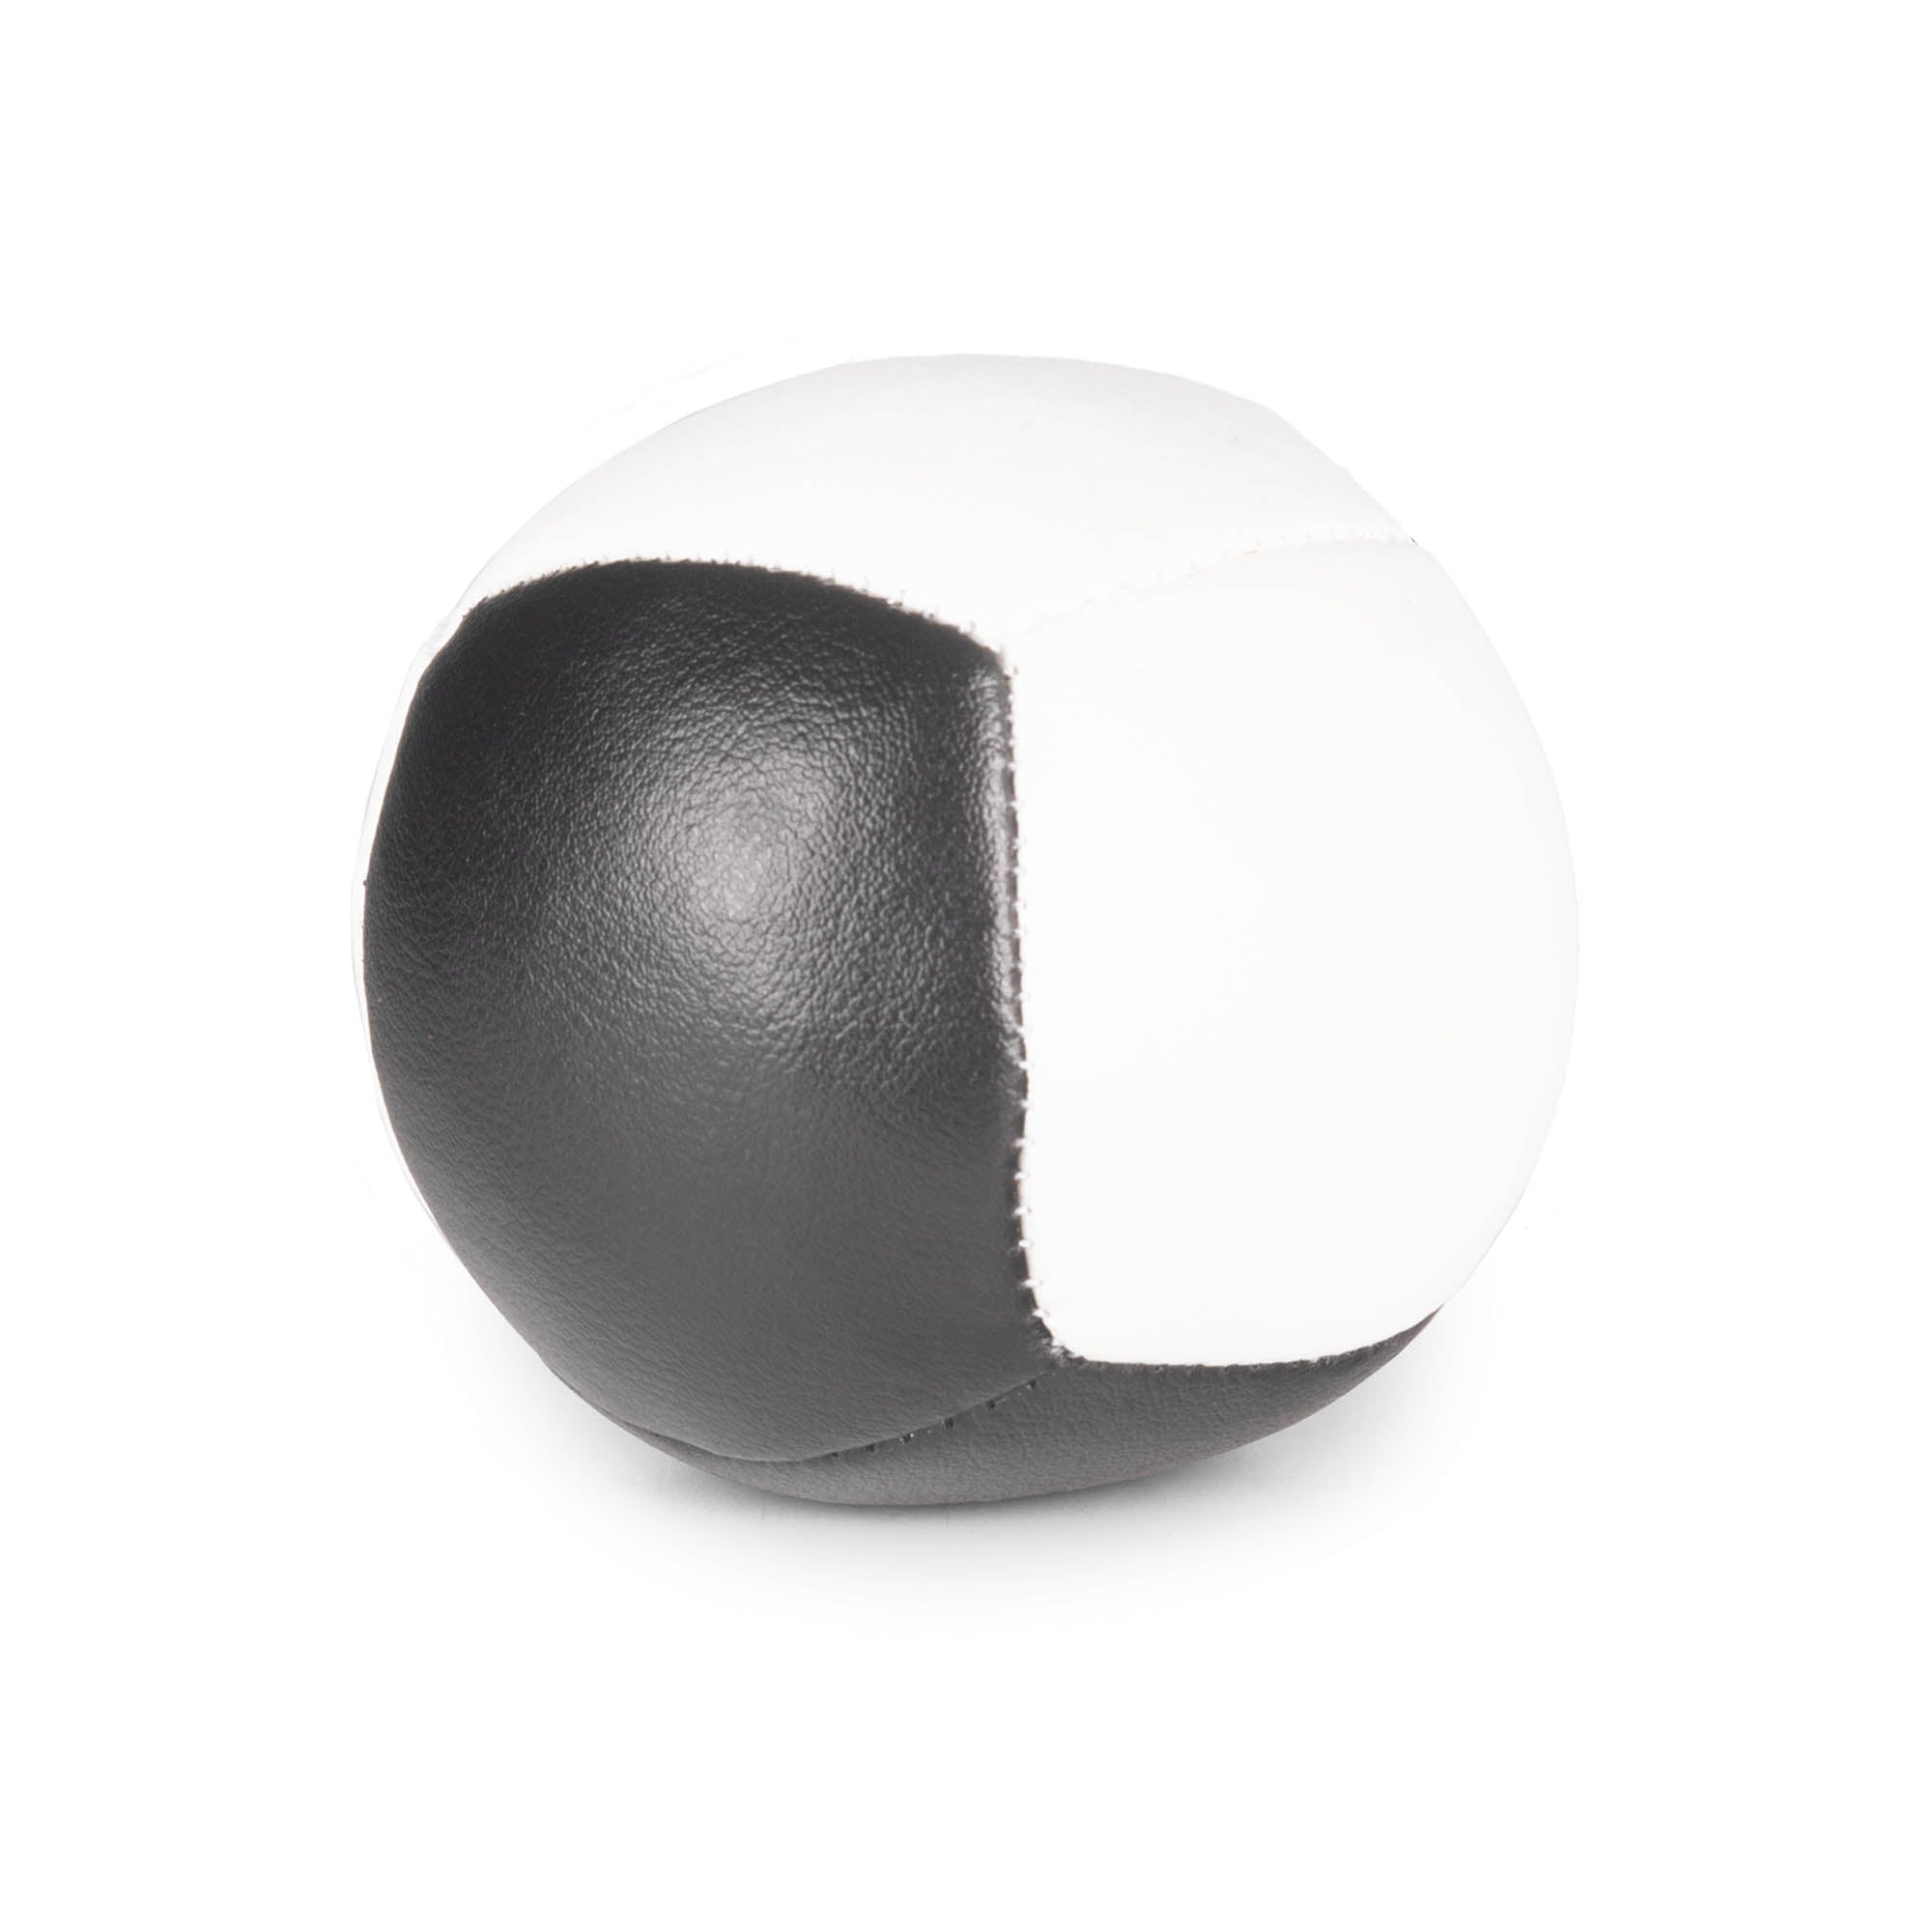 Firetoys black/white 110g thud juggling ball, straight on in a white background